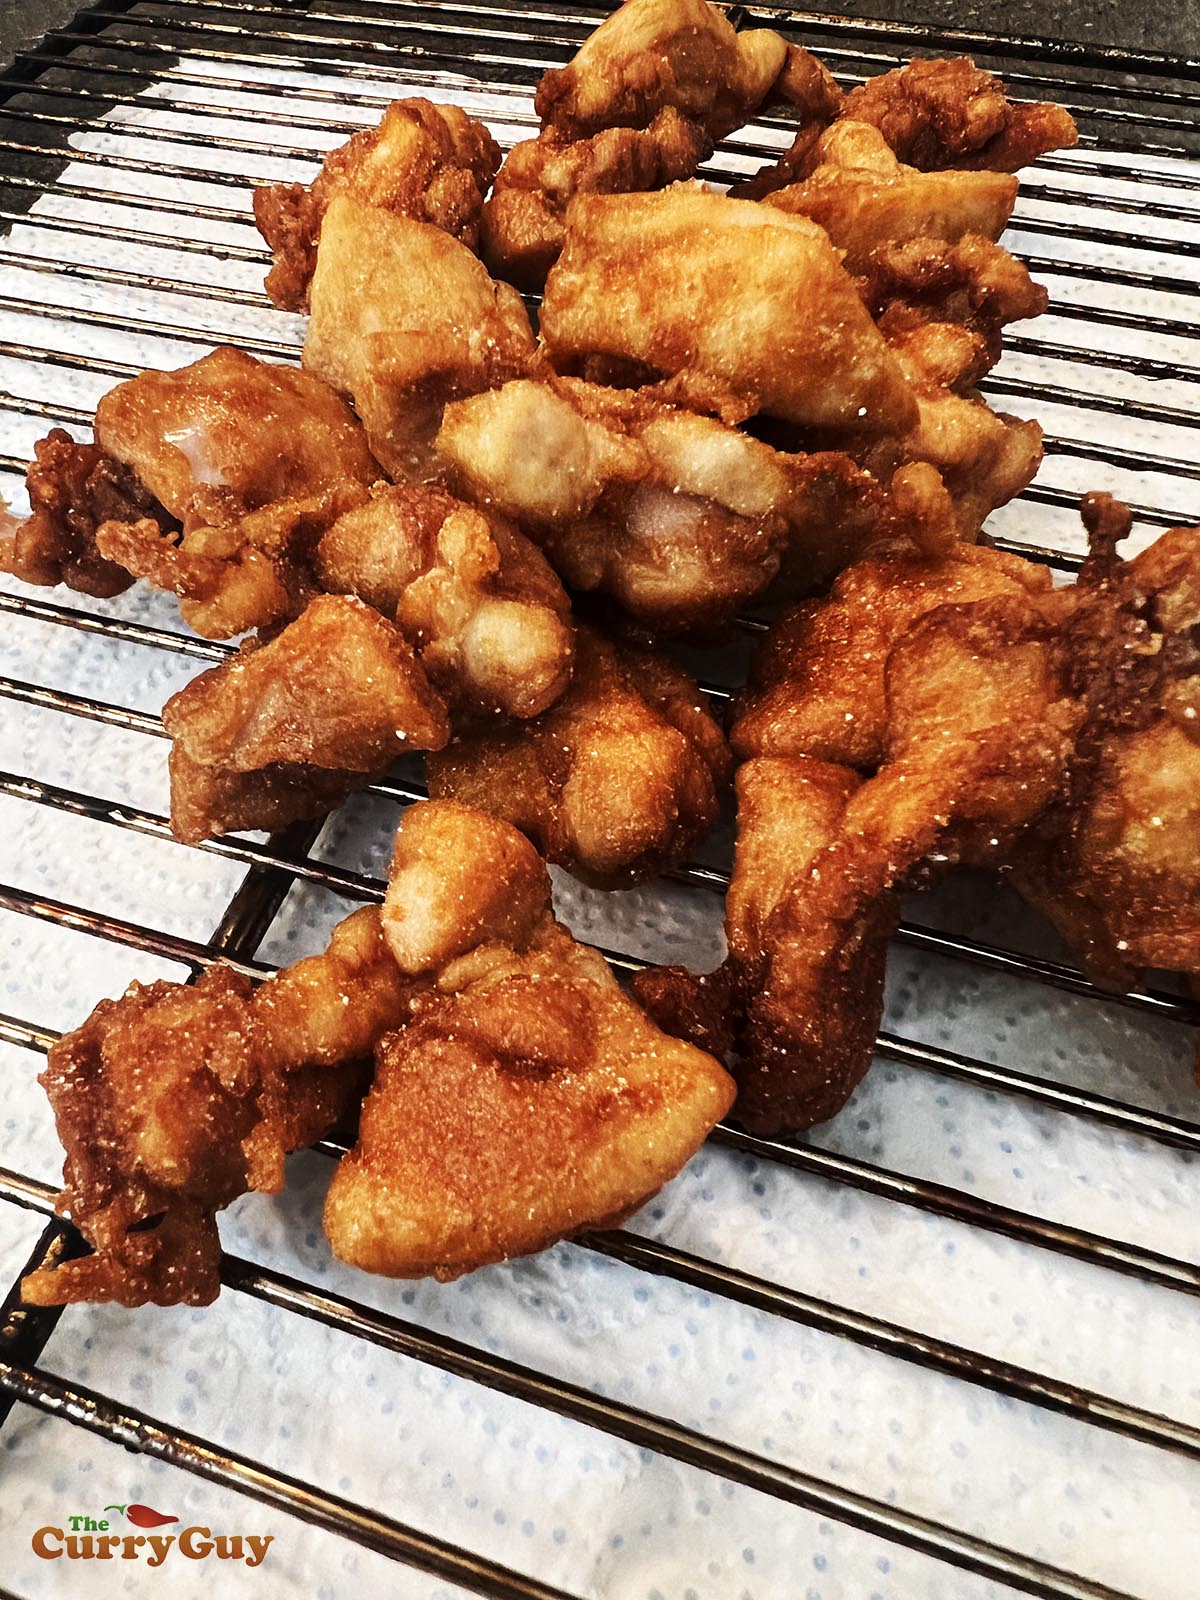 Fried chicken resting on a rack.